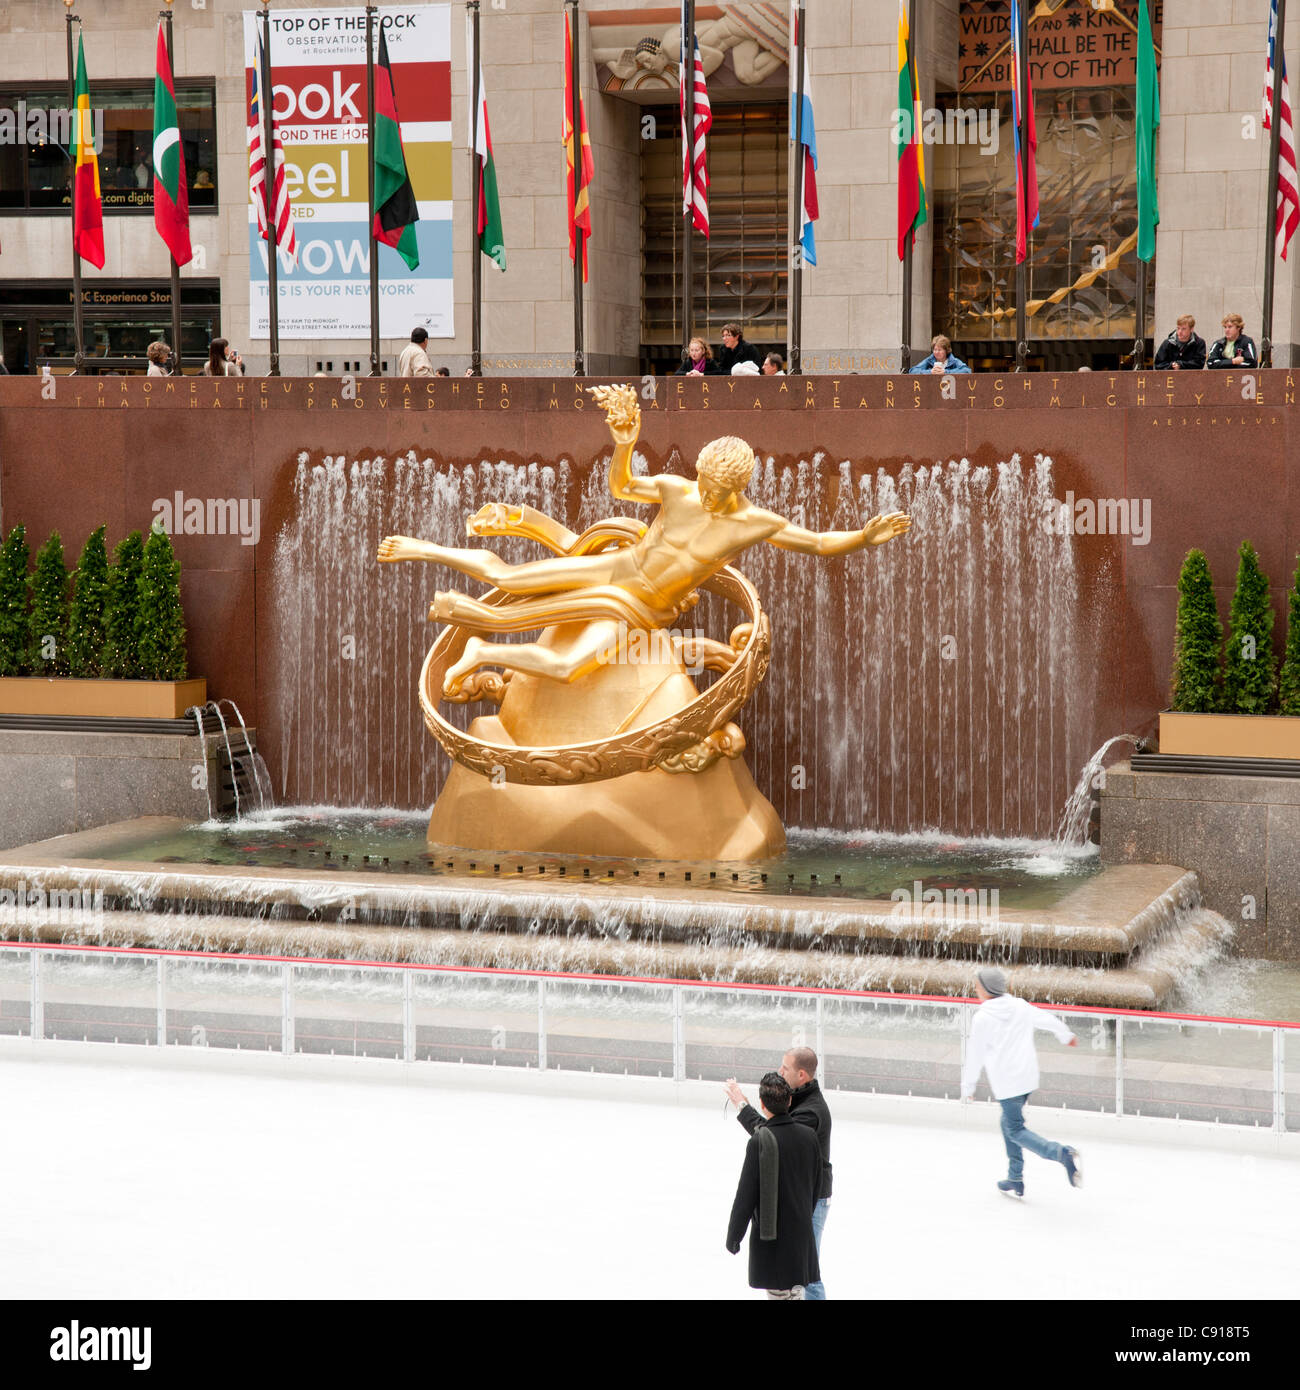 The Prometheus Statue by Paul Manship at Rockefeller Center in New York overlooks the ice skating rink at the centre outside Stock Photo